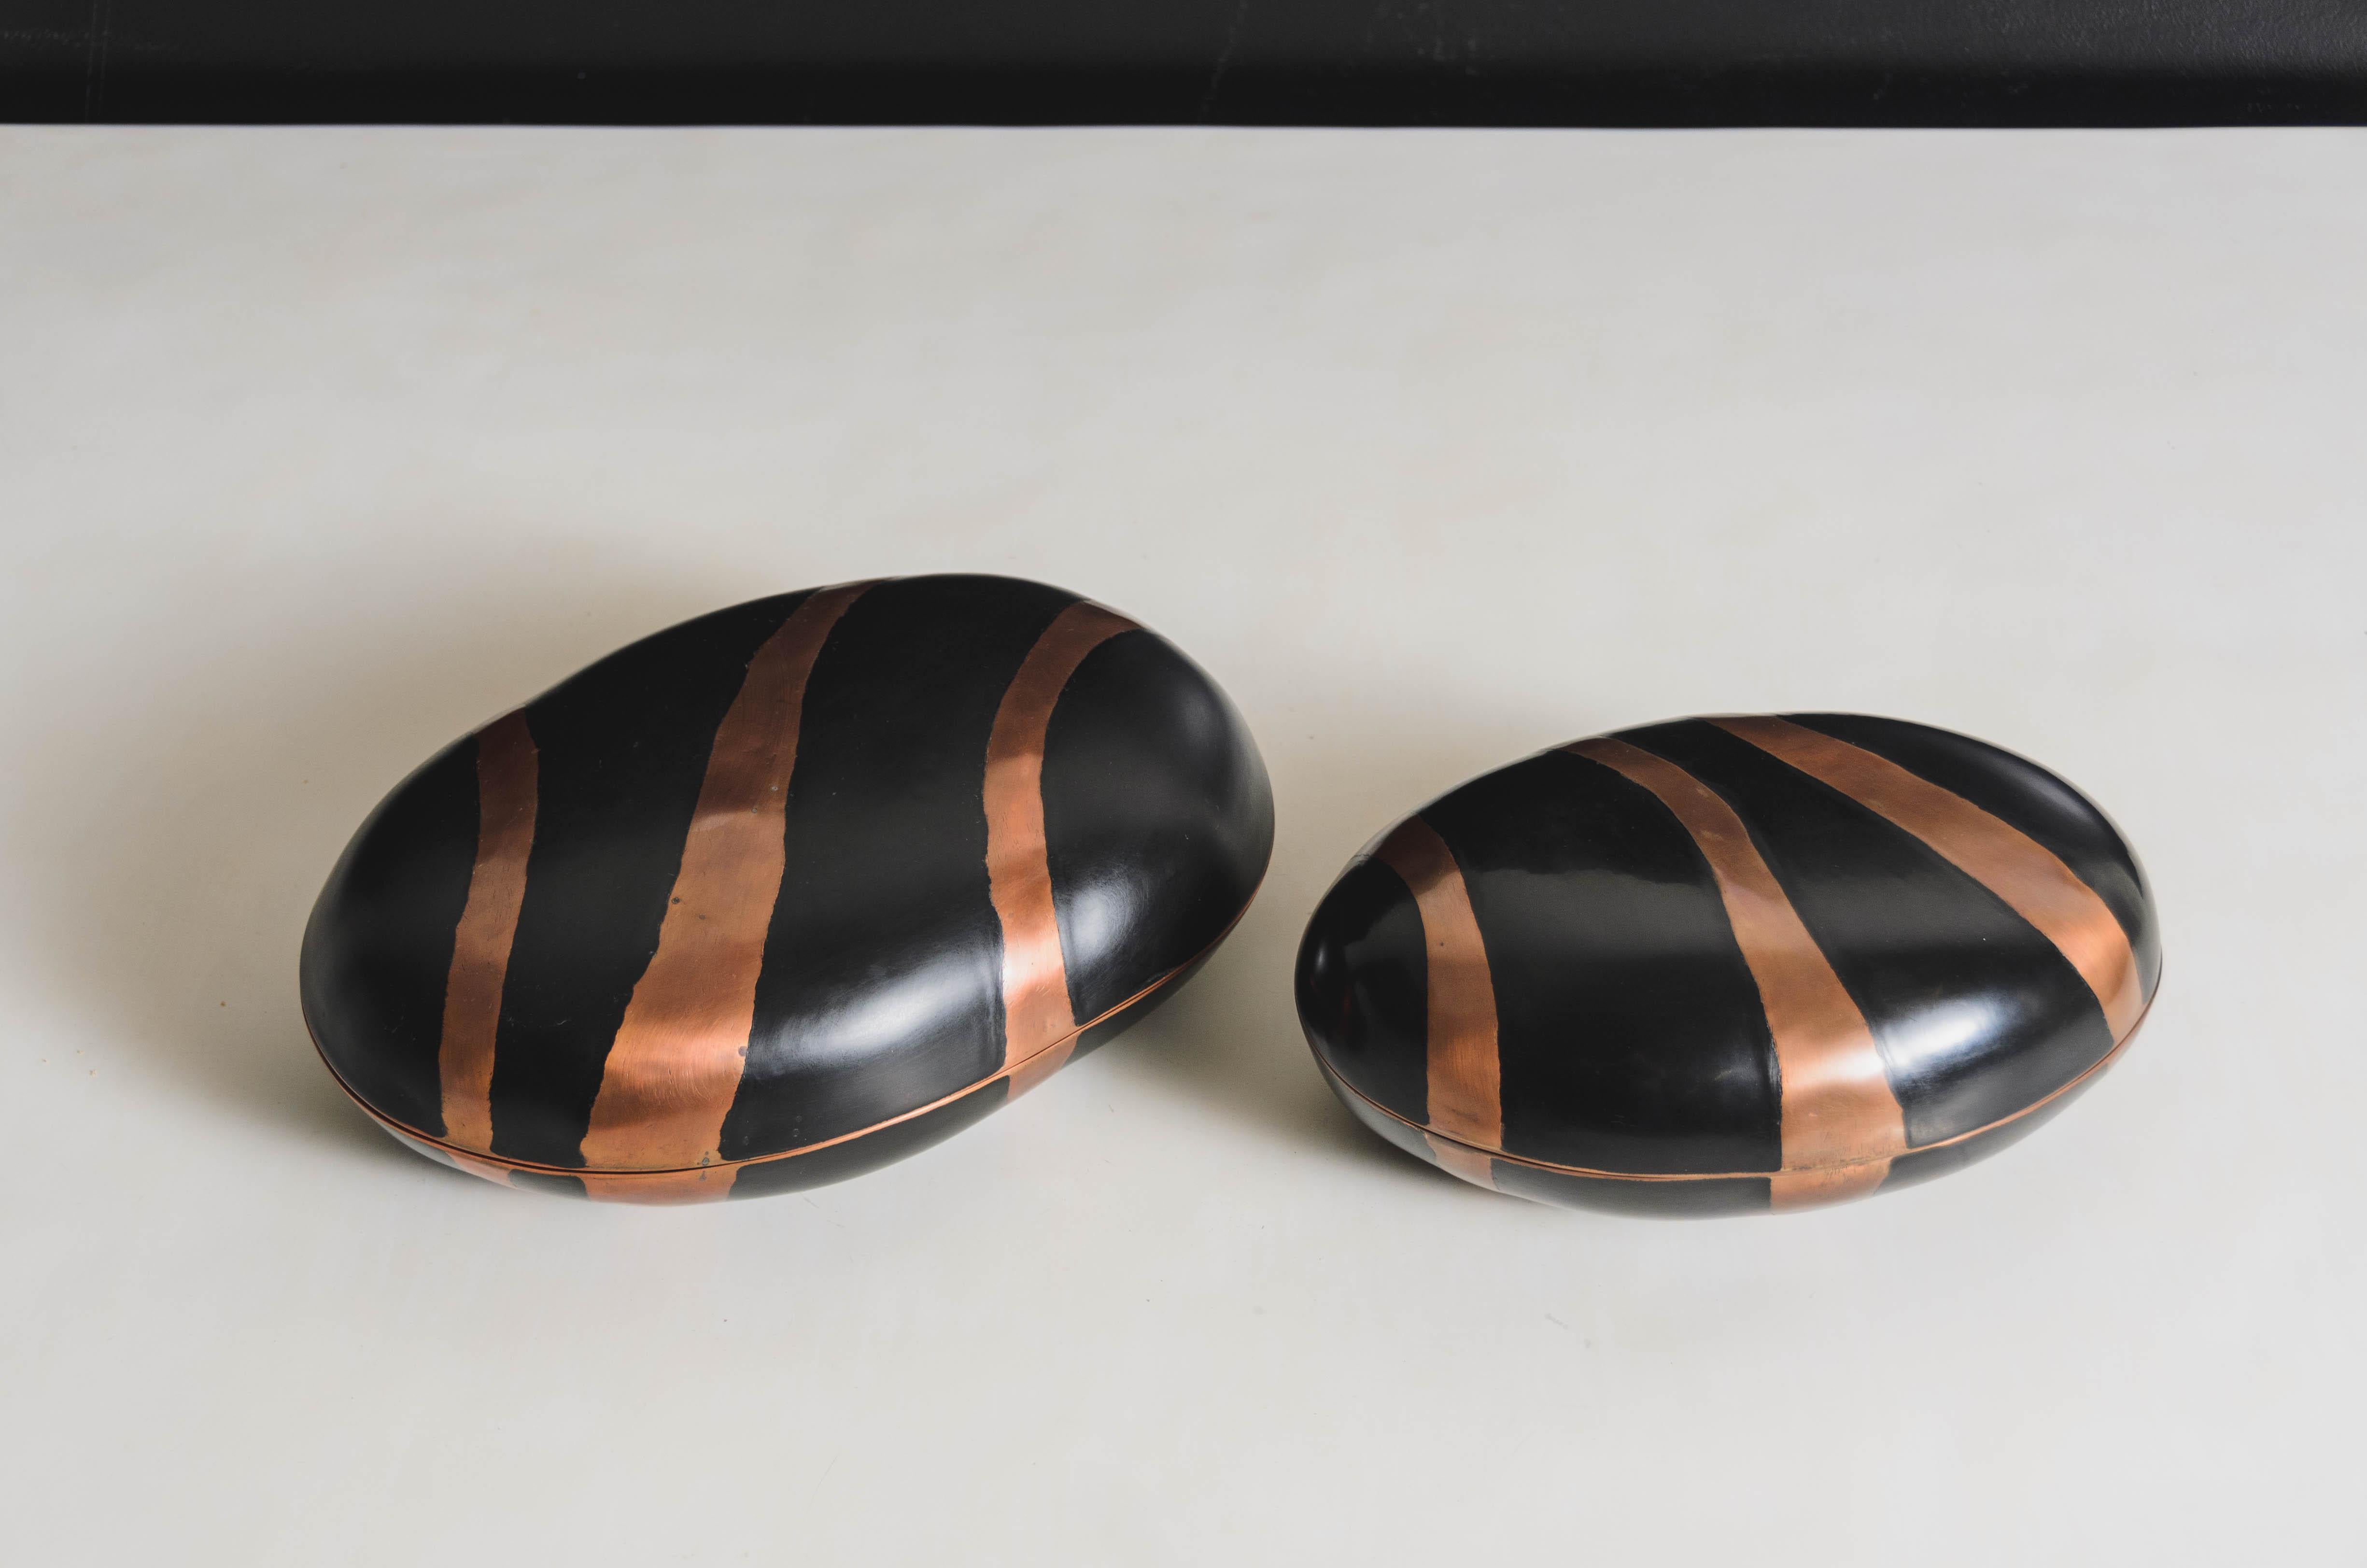 Small Zebra Box in Black Lacquer and Copper by Robert Kuo, Hand Repoussé For Sale 1